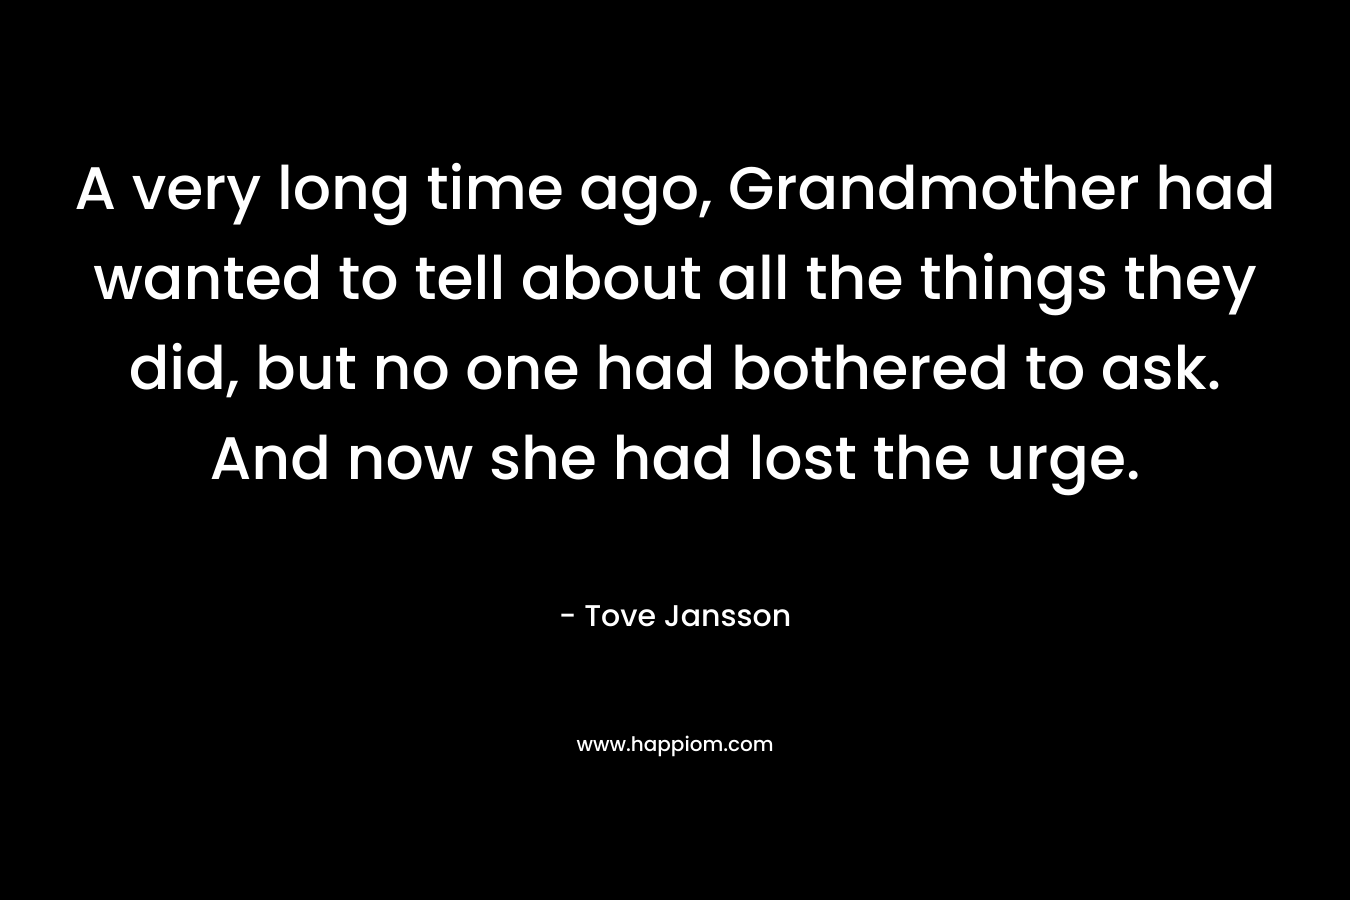 A very long time ago, Grandmother had wanted to tell about all the things they did, but no one had bothered to ask. And now she had lost the urge. – Tove Jansson